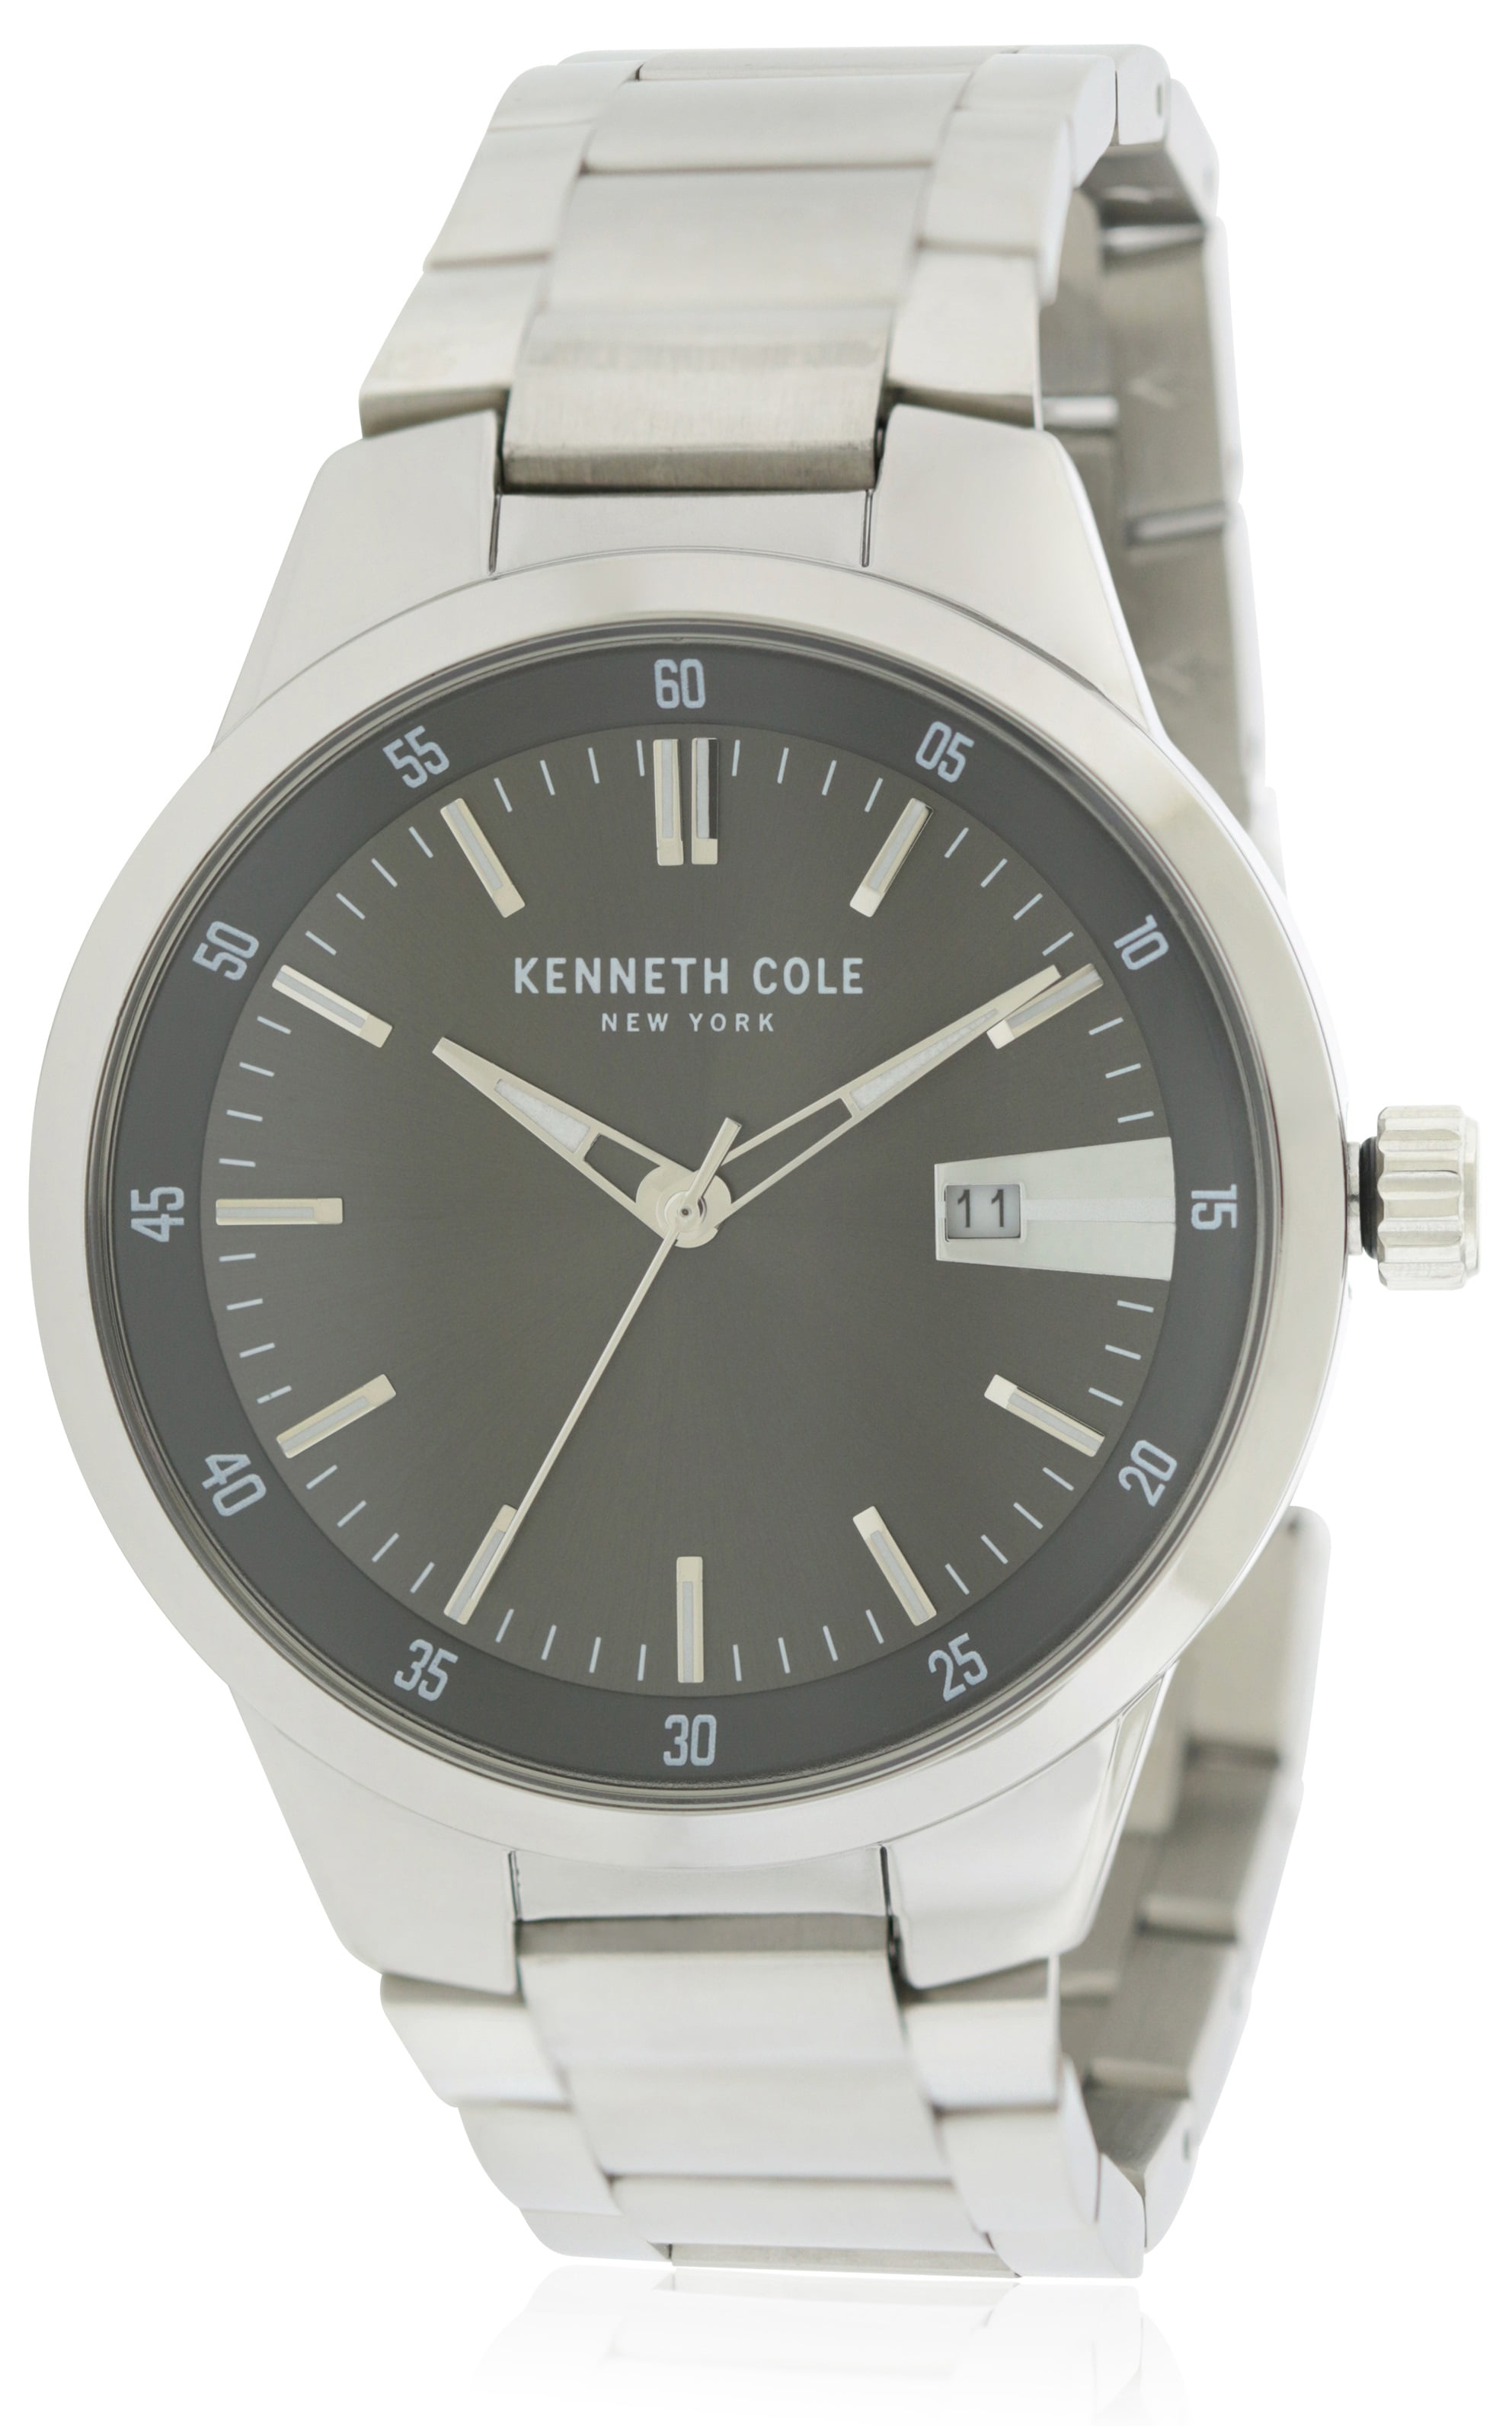 Kenneth Cole - Kenneth Cole Men's Stainless Steel Watch KCC0131001 Men's Stainless Steel Watch